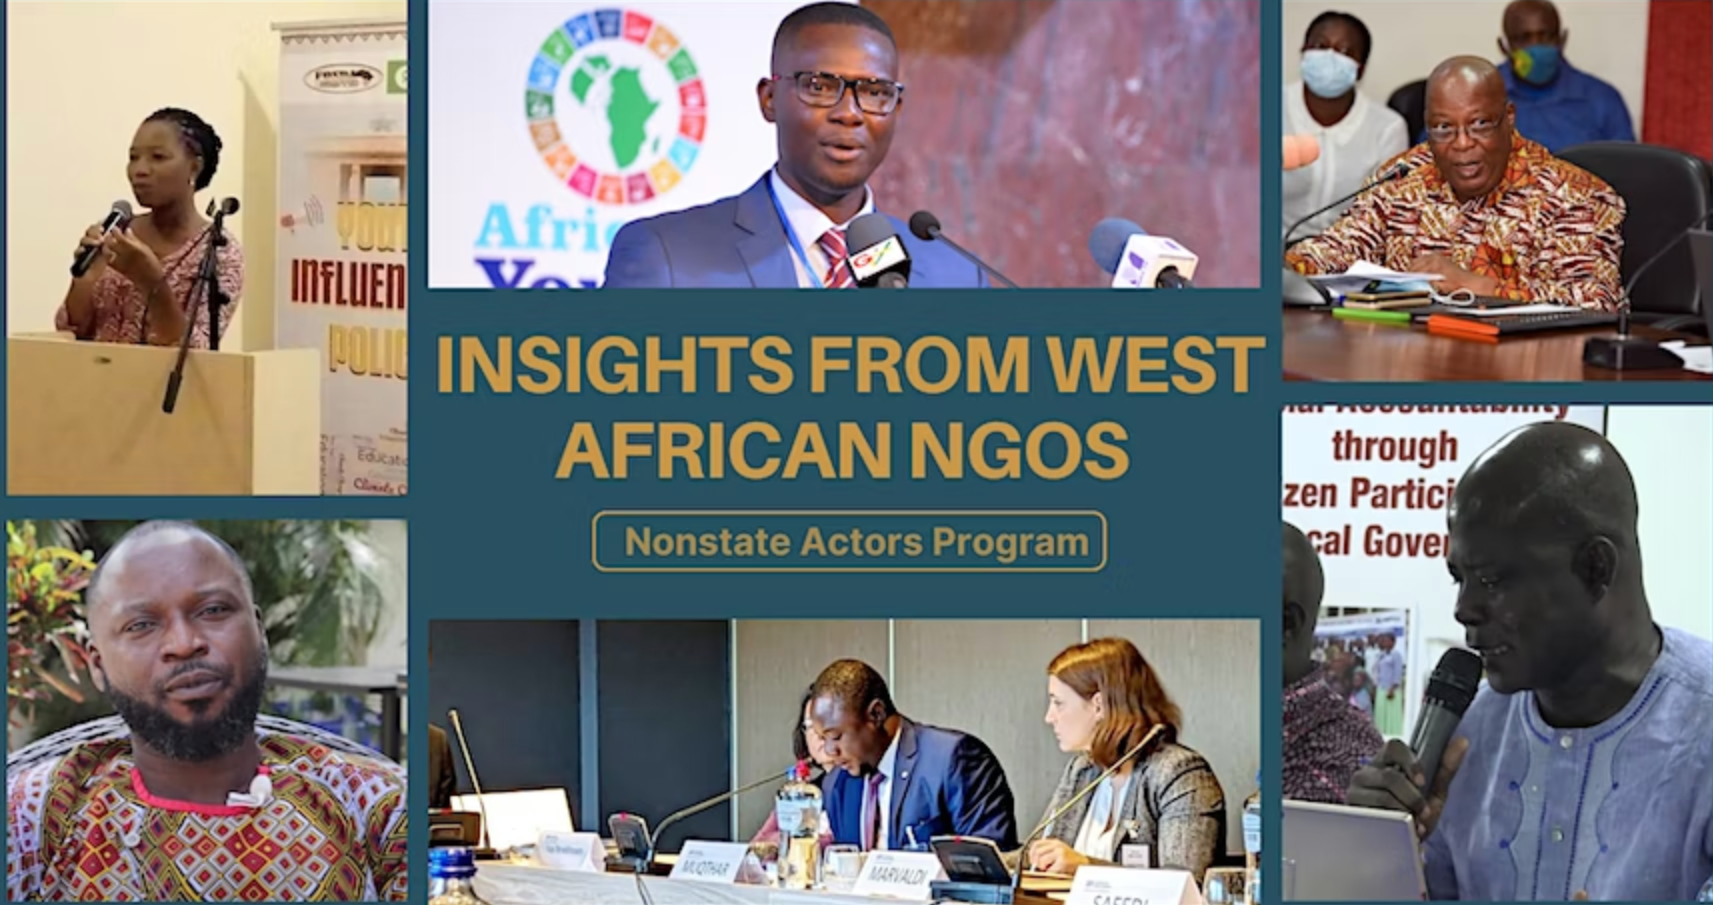 Listen to Local Actors: Insights from West African NGOs ahead of Africa Summit